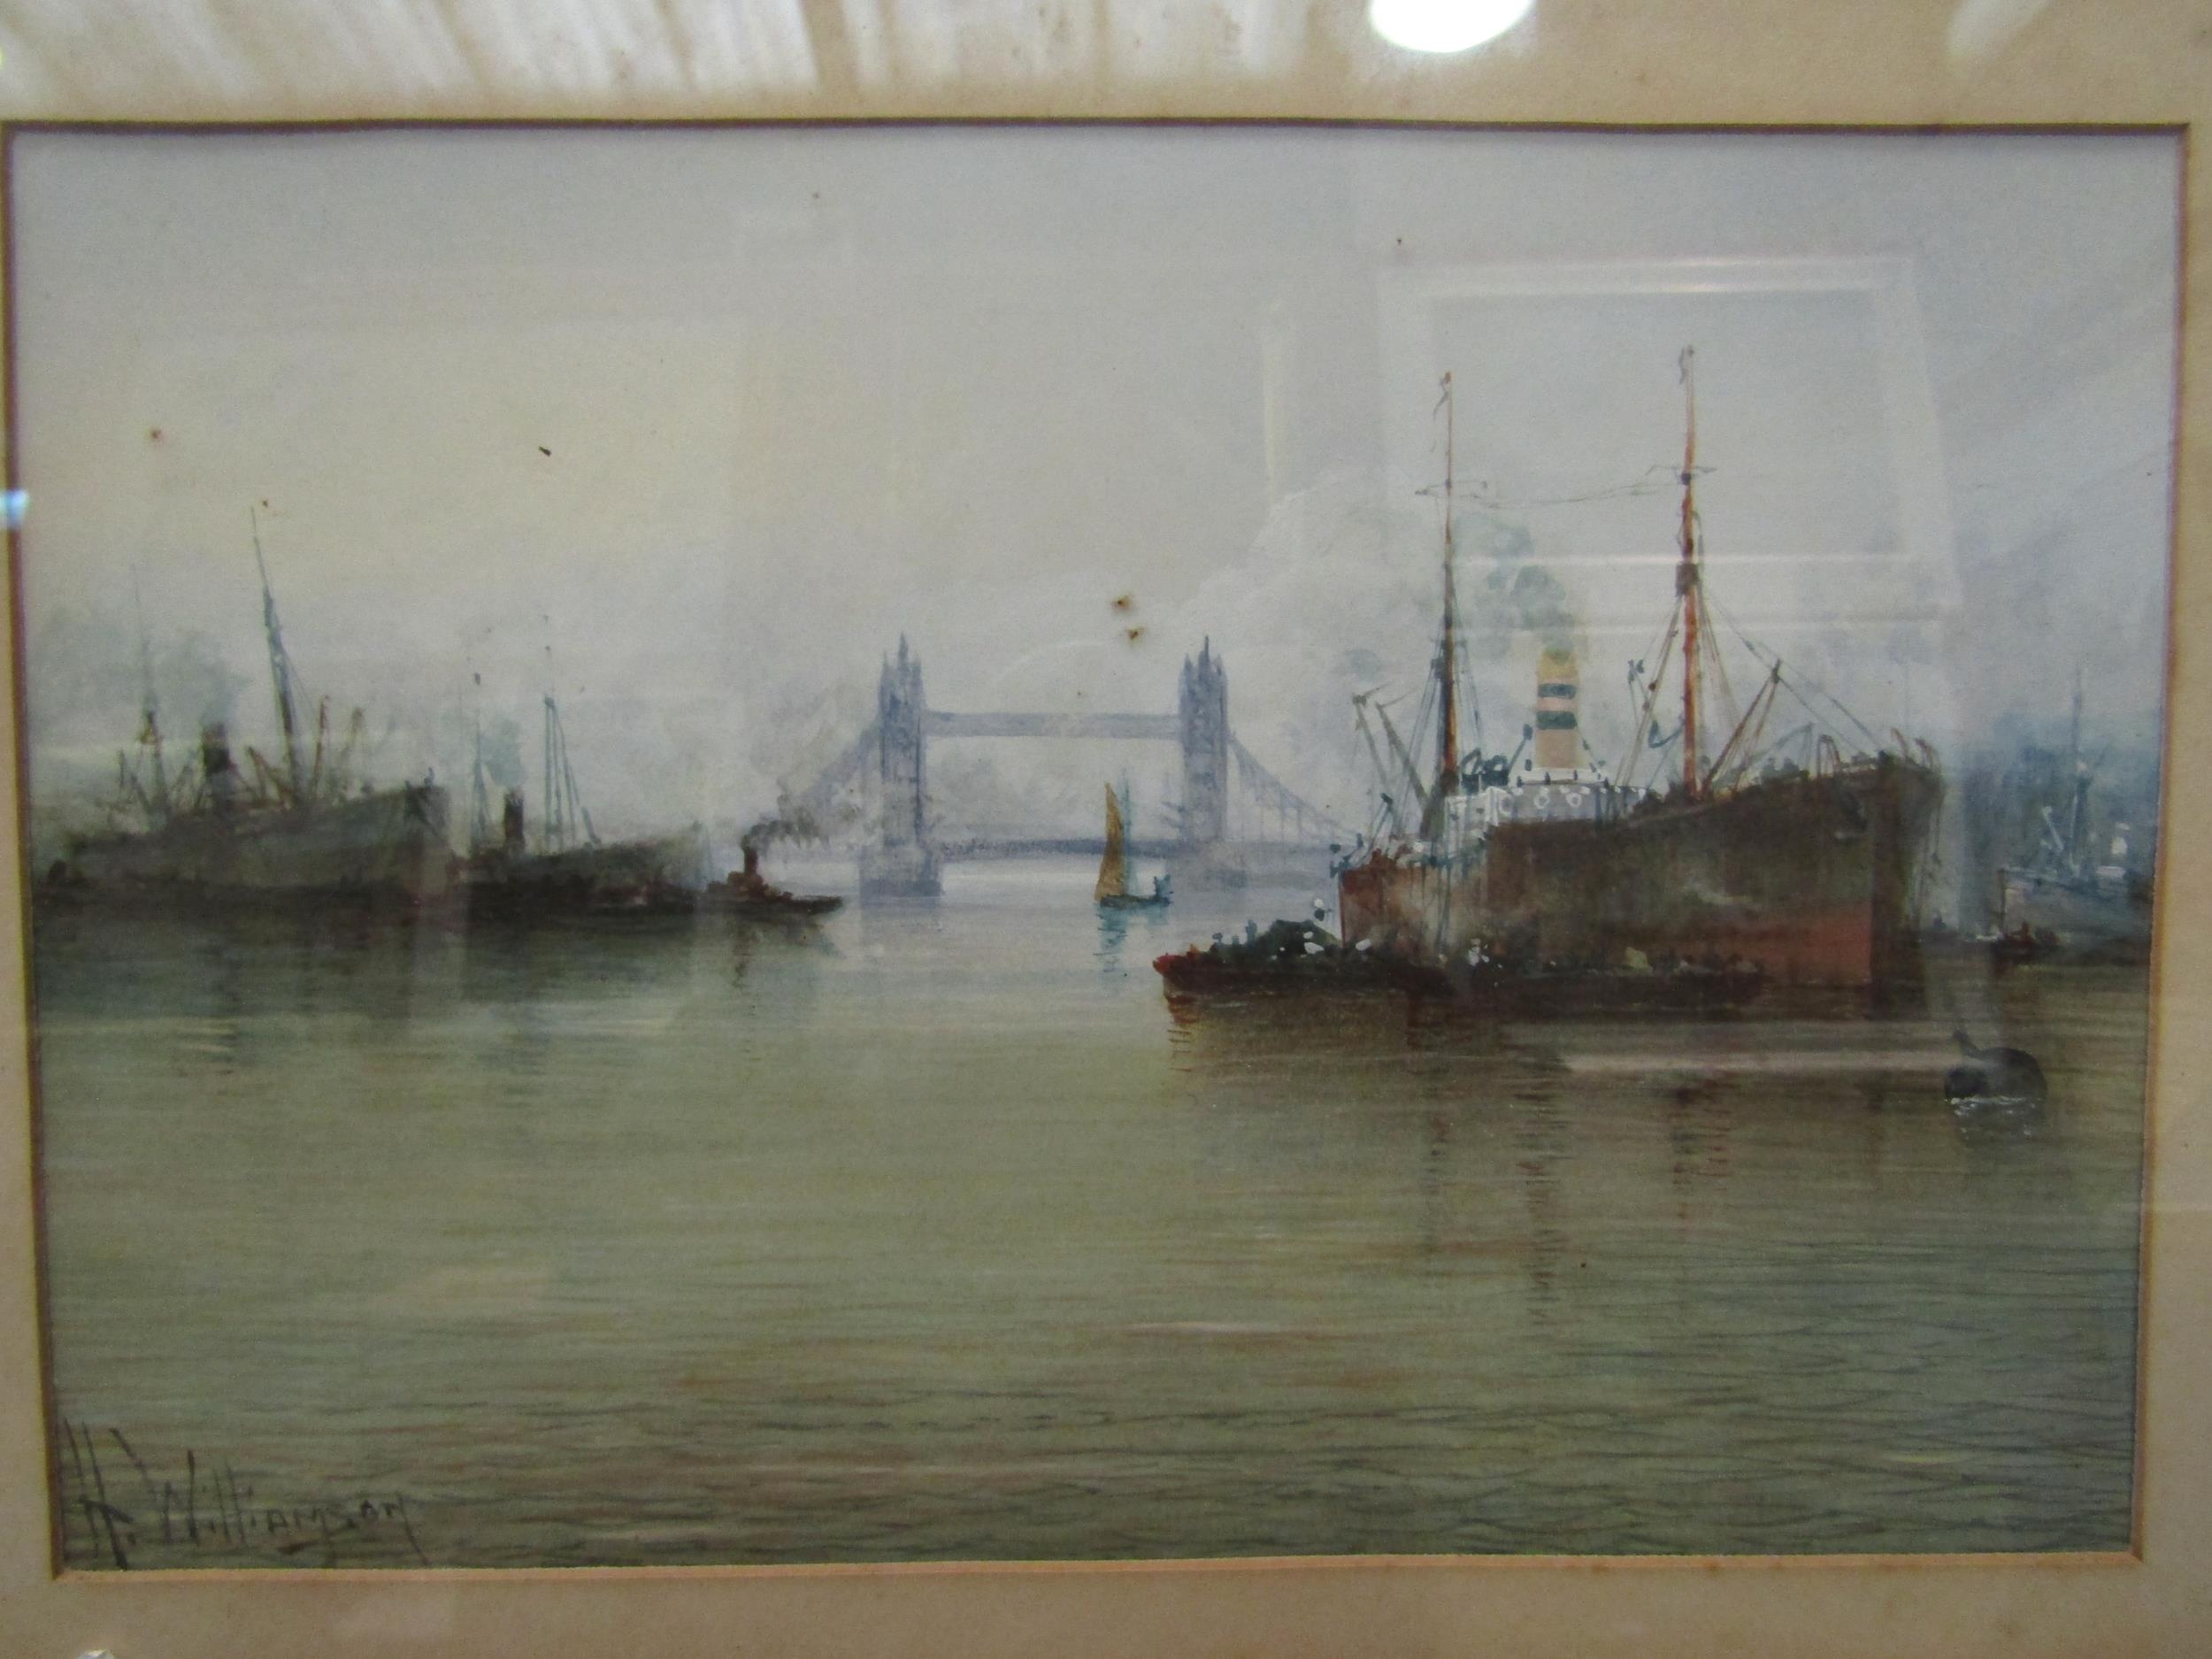 H. WILLIAMSON: Watercolour depicting working vessals on The Thames with London Bridge in the